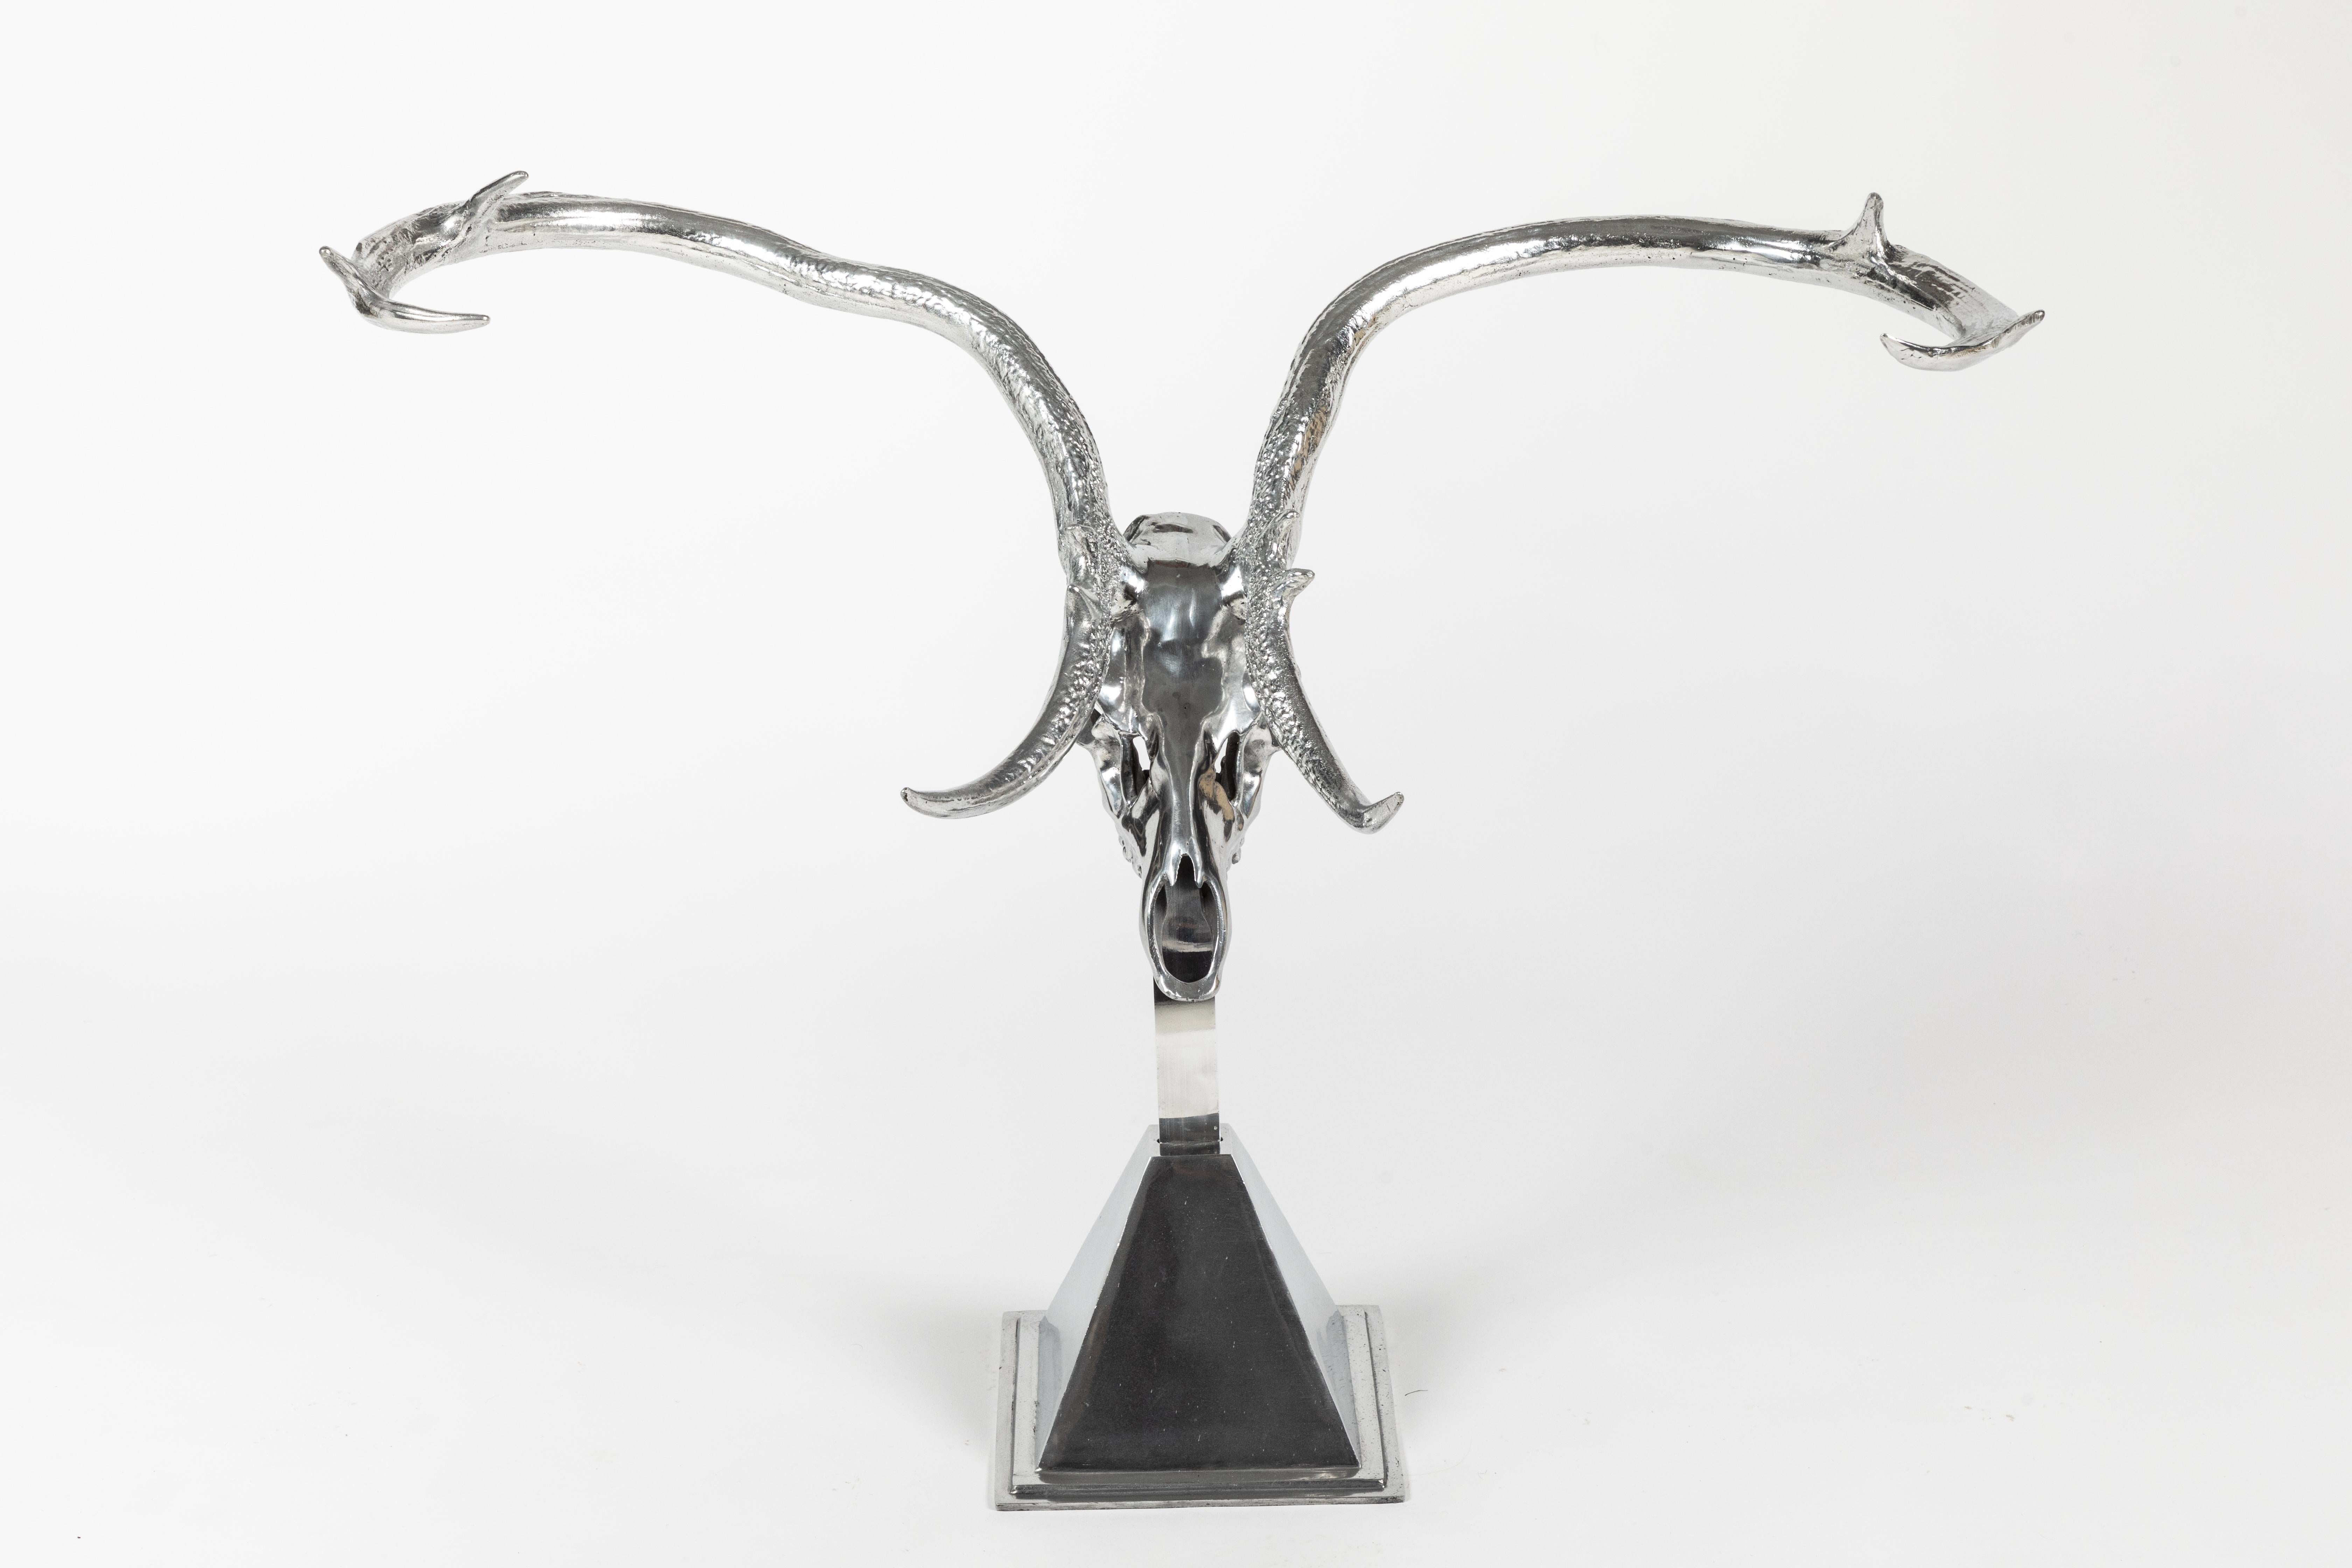 A polished aluminum chital deer skull on an original base by Arthur Court. Skull can be removed from the base and hung on the wall if you prefer.